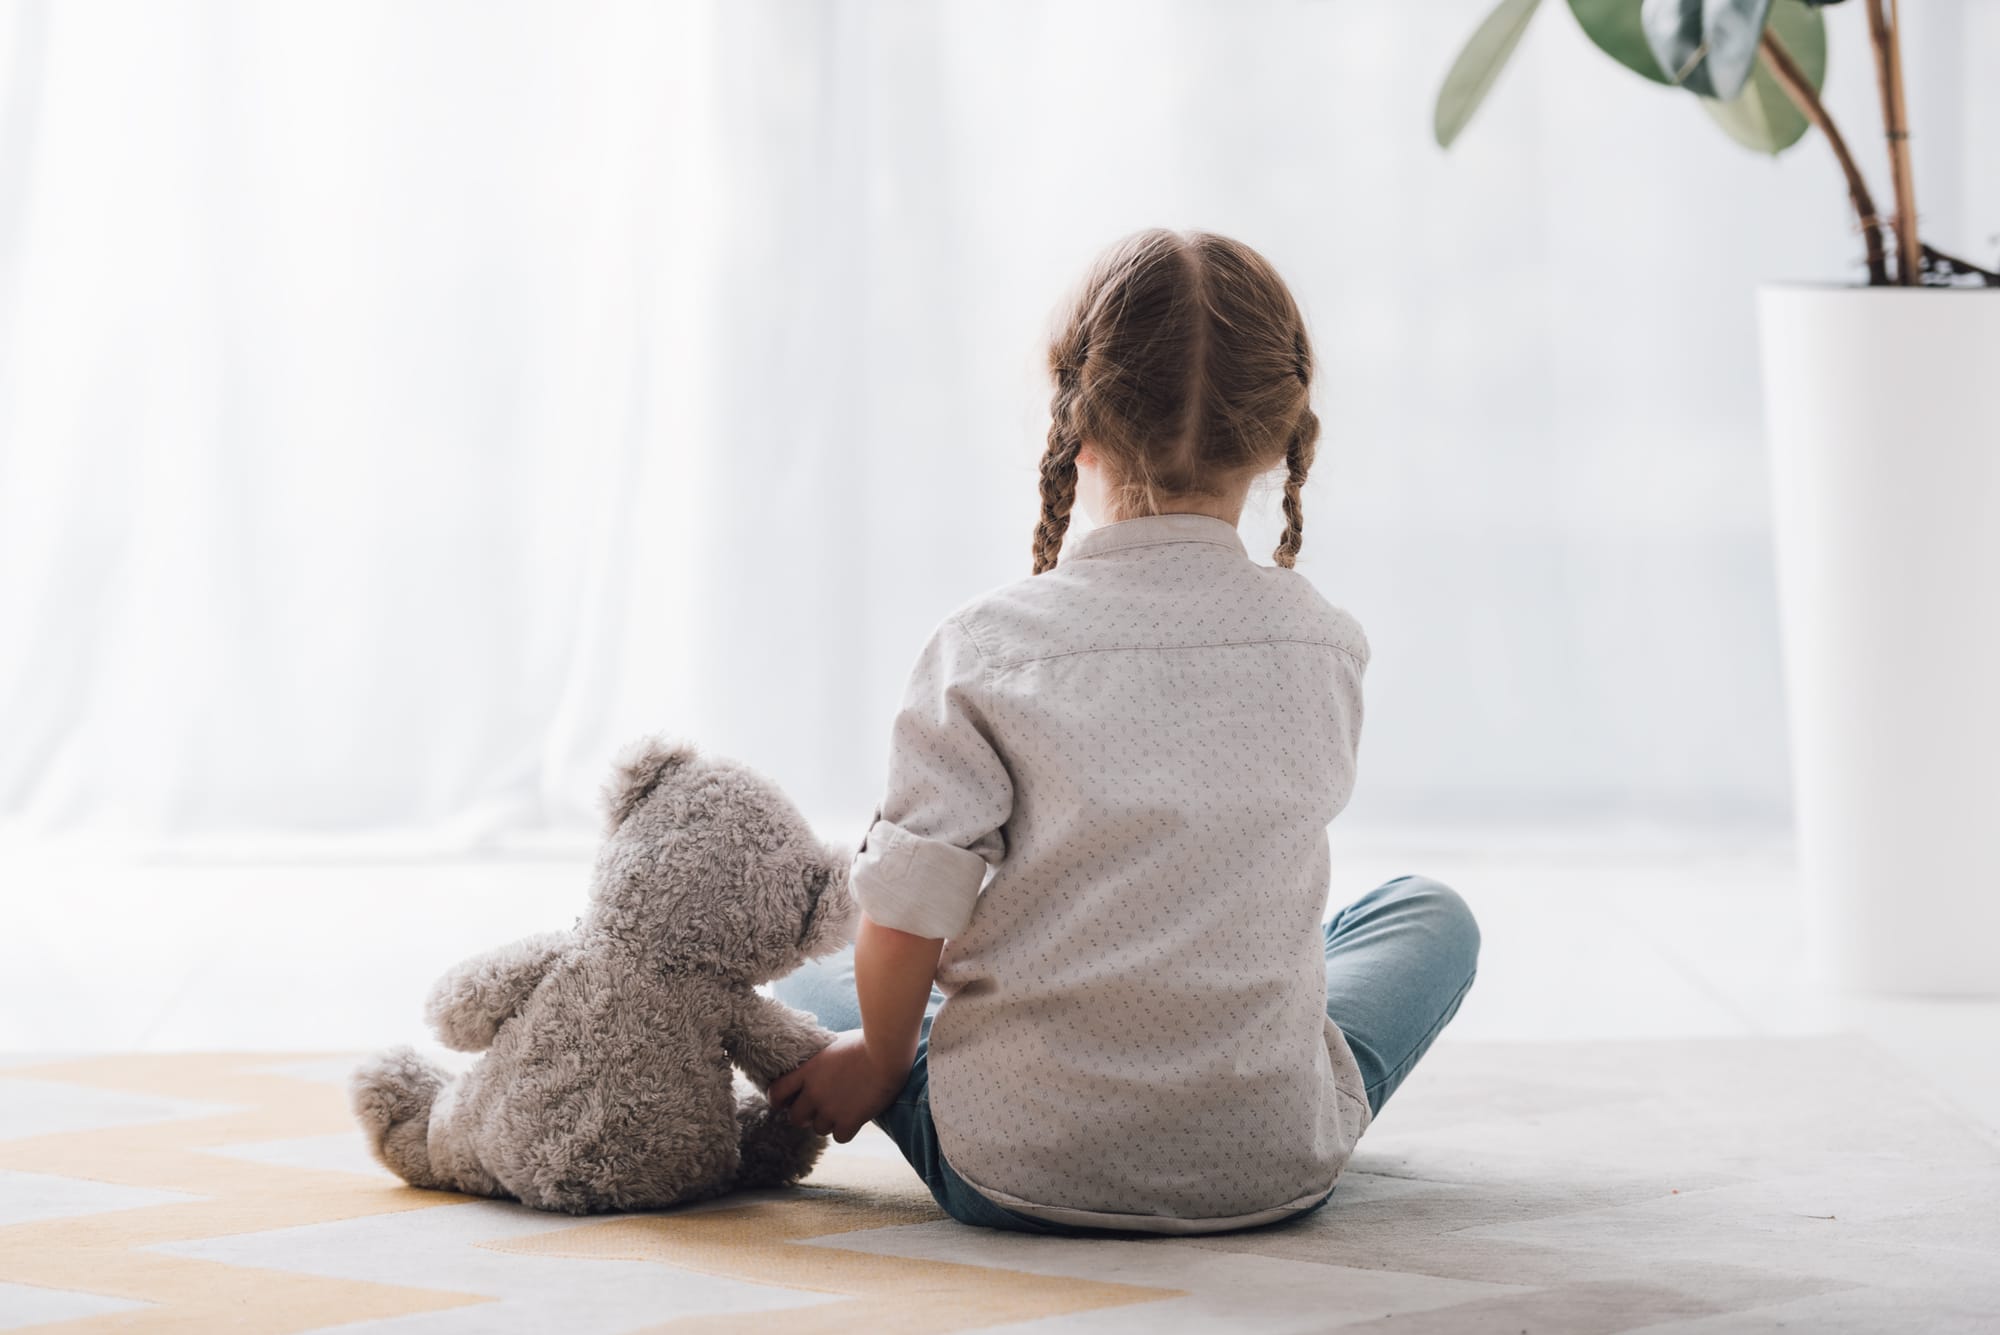 Does Your Child Need Therapy, Does Your Child Need Therapy? Here Are the Best Types of Therapies for Kids, Days of a Domestic Dad